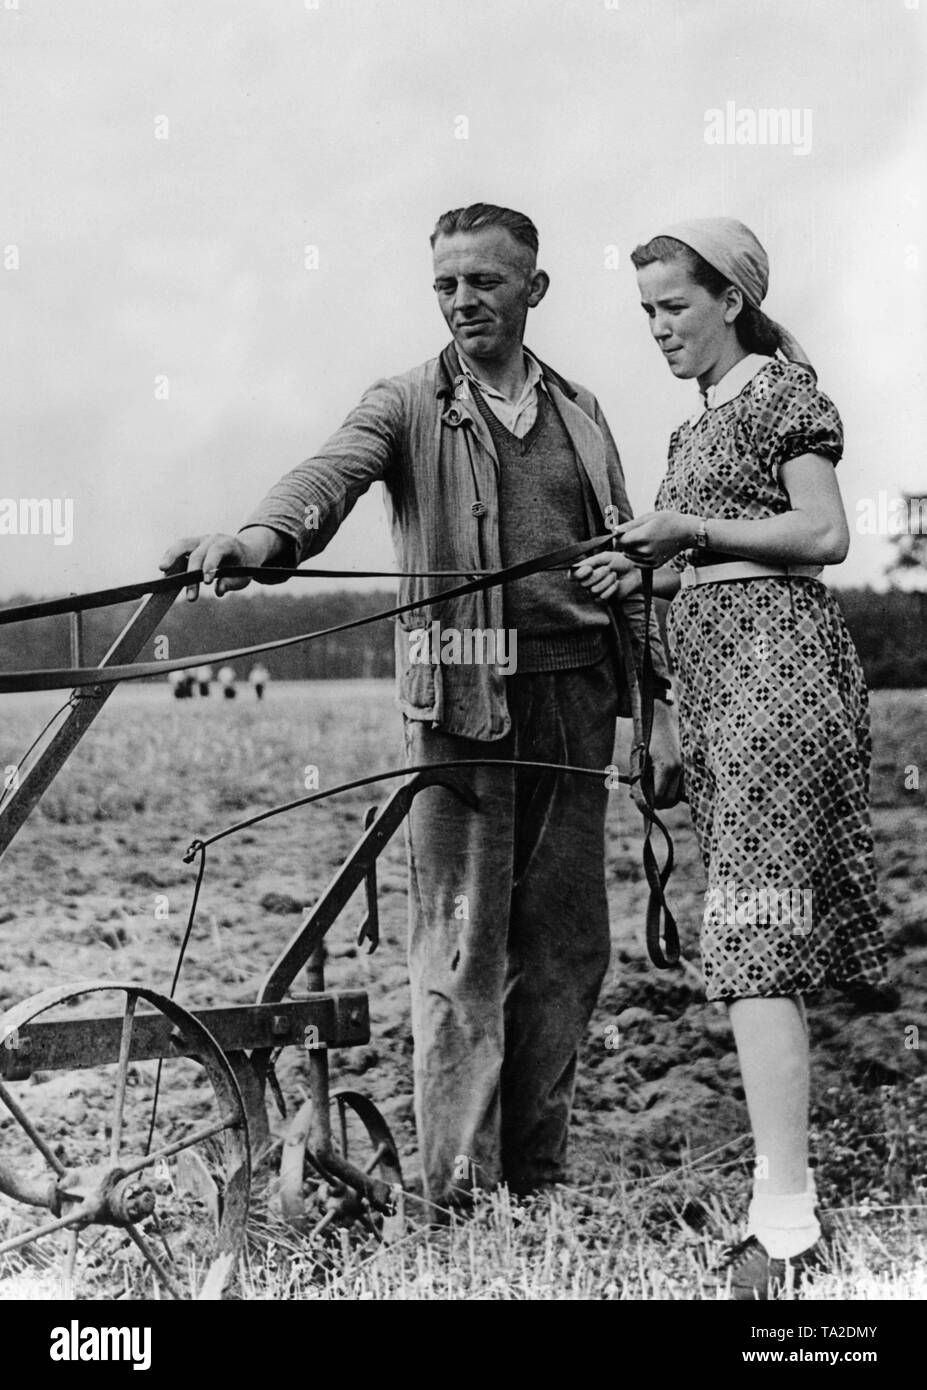 A farmer instructs a BDM leader how to use the plow in the military service. Stock Photo